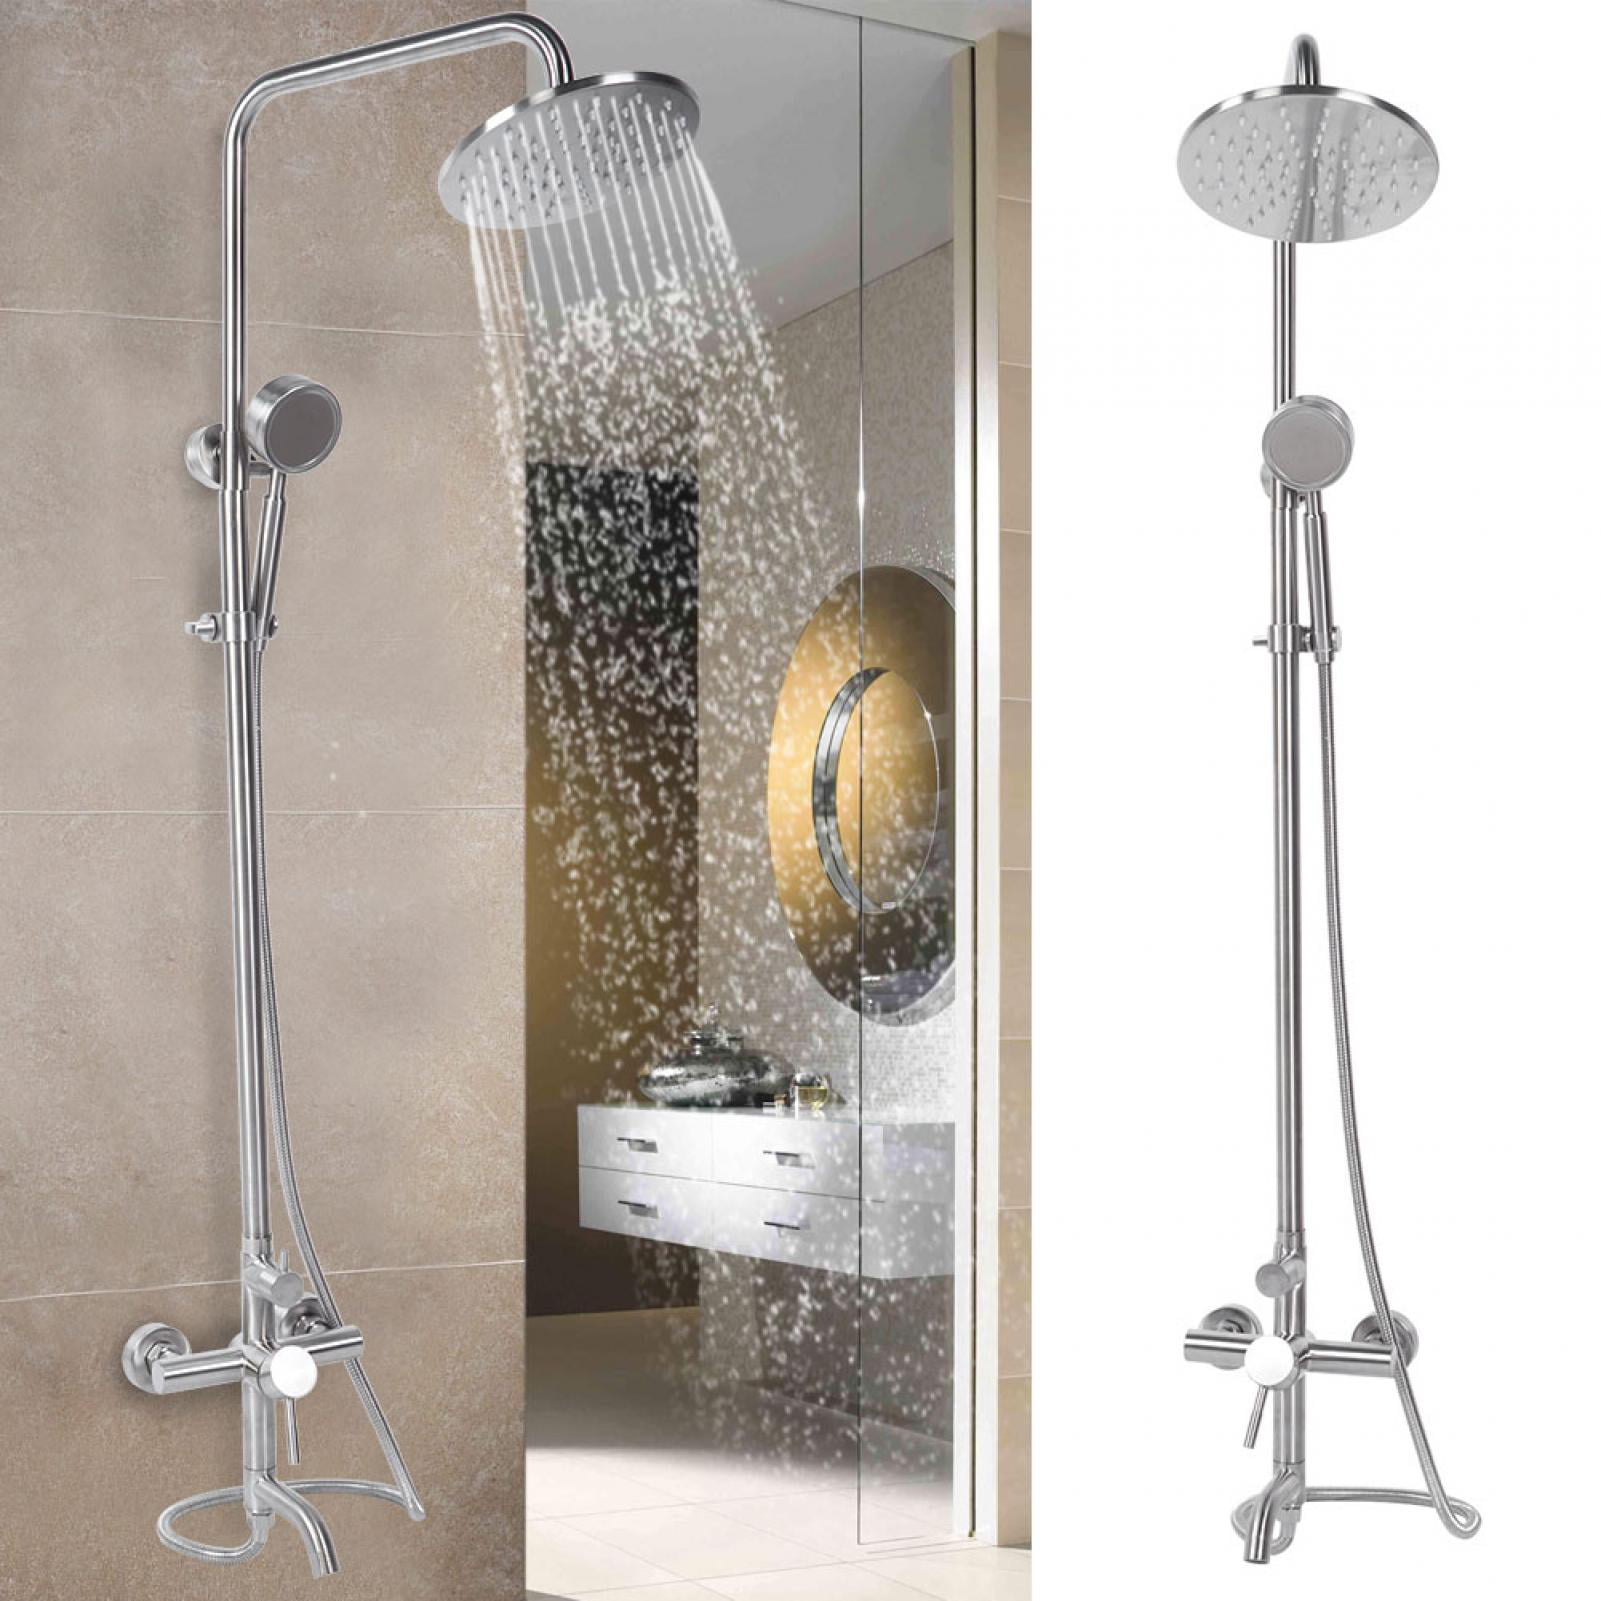 Handset Bathroom Accessories Shower Base Wall Mount Silver Chrome Fixed Seat KS 